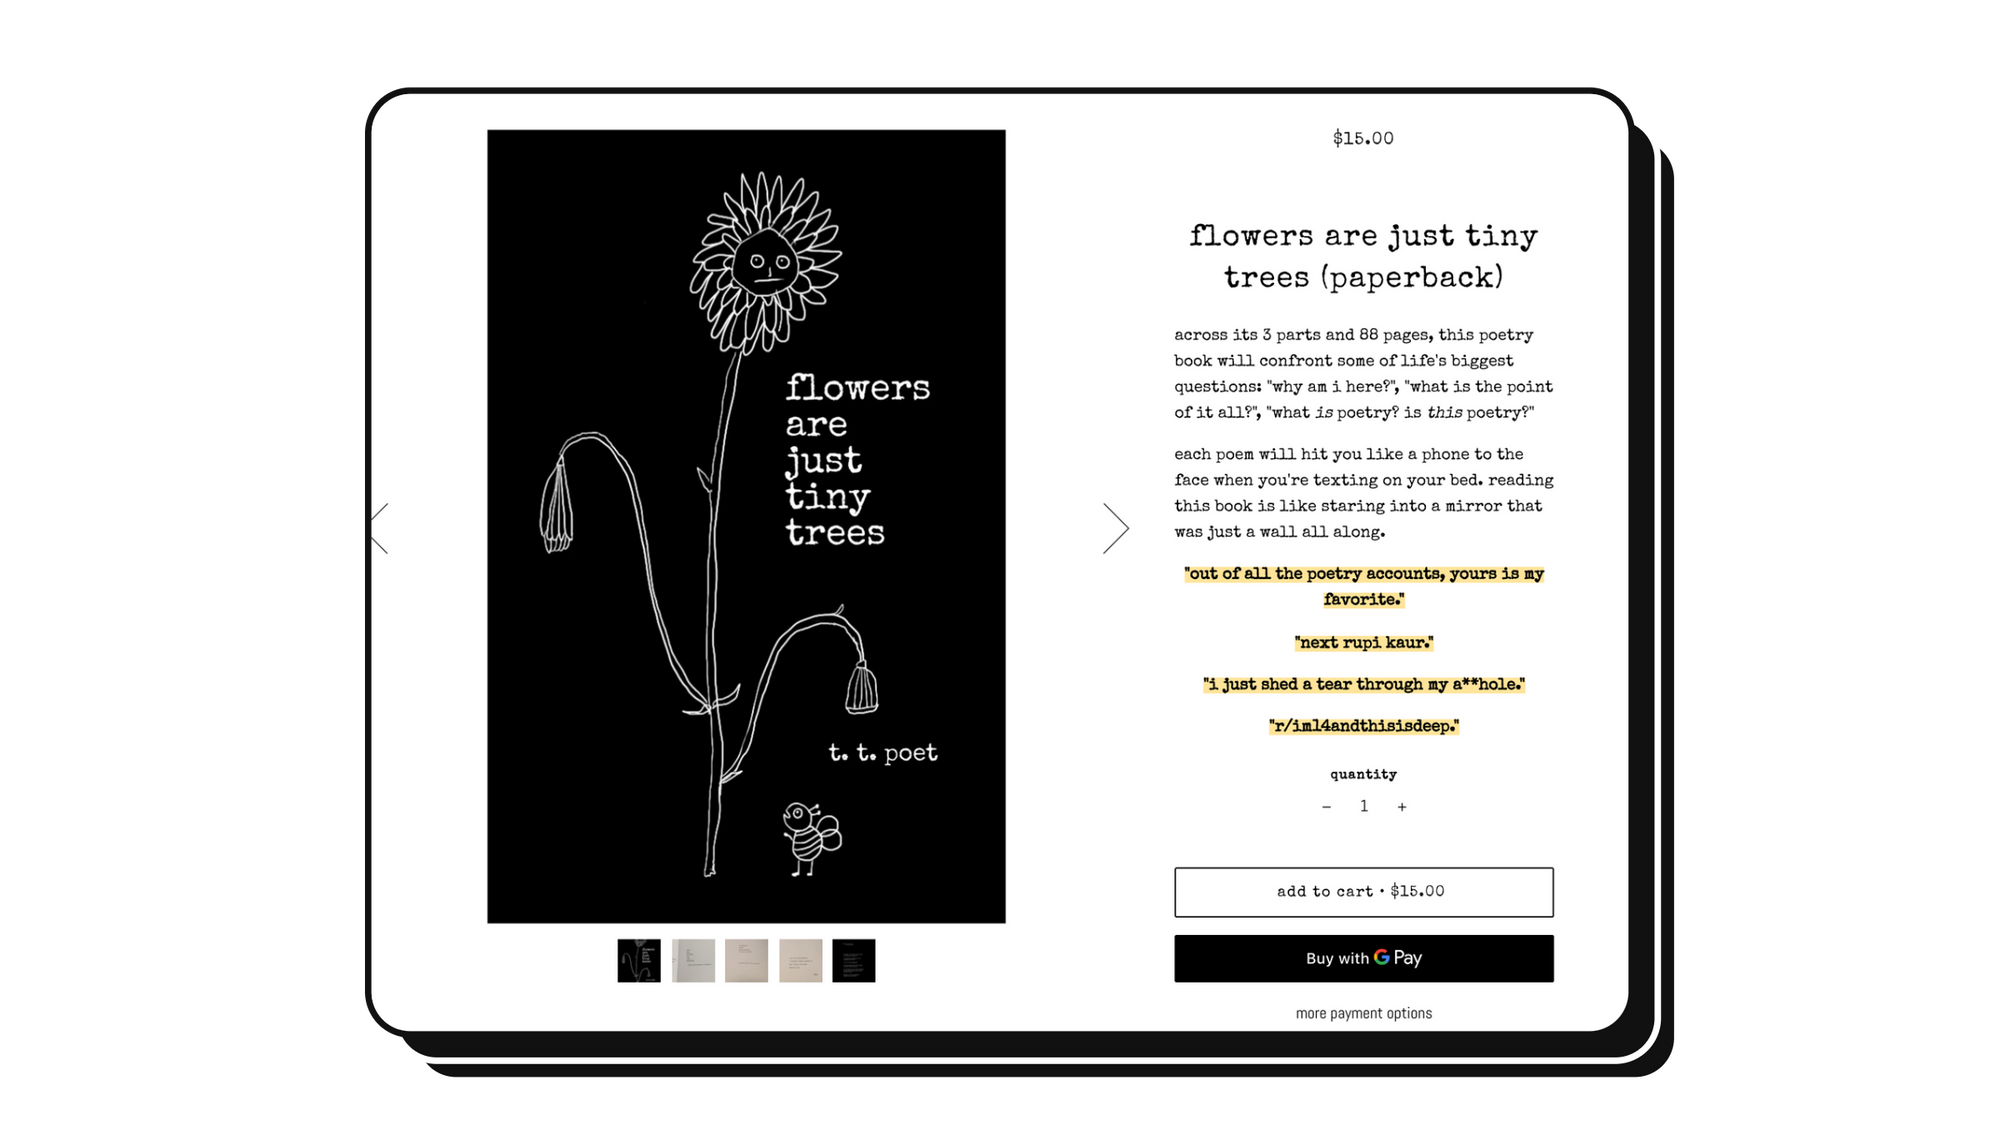 Screenshot of The Tumblr Poet's Shopify store selling the book